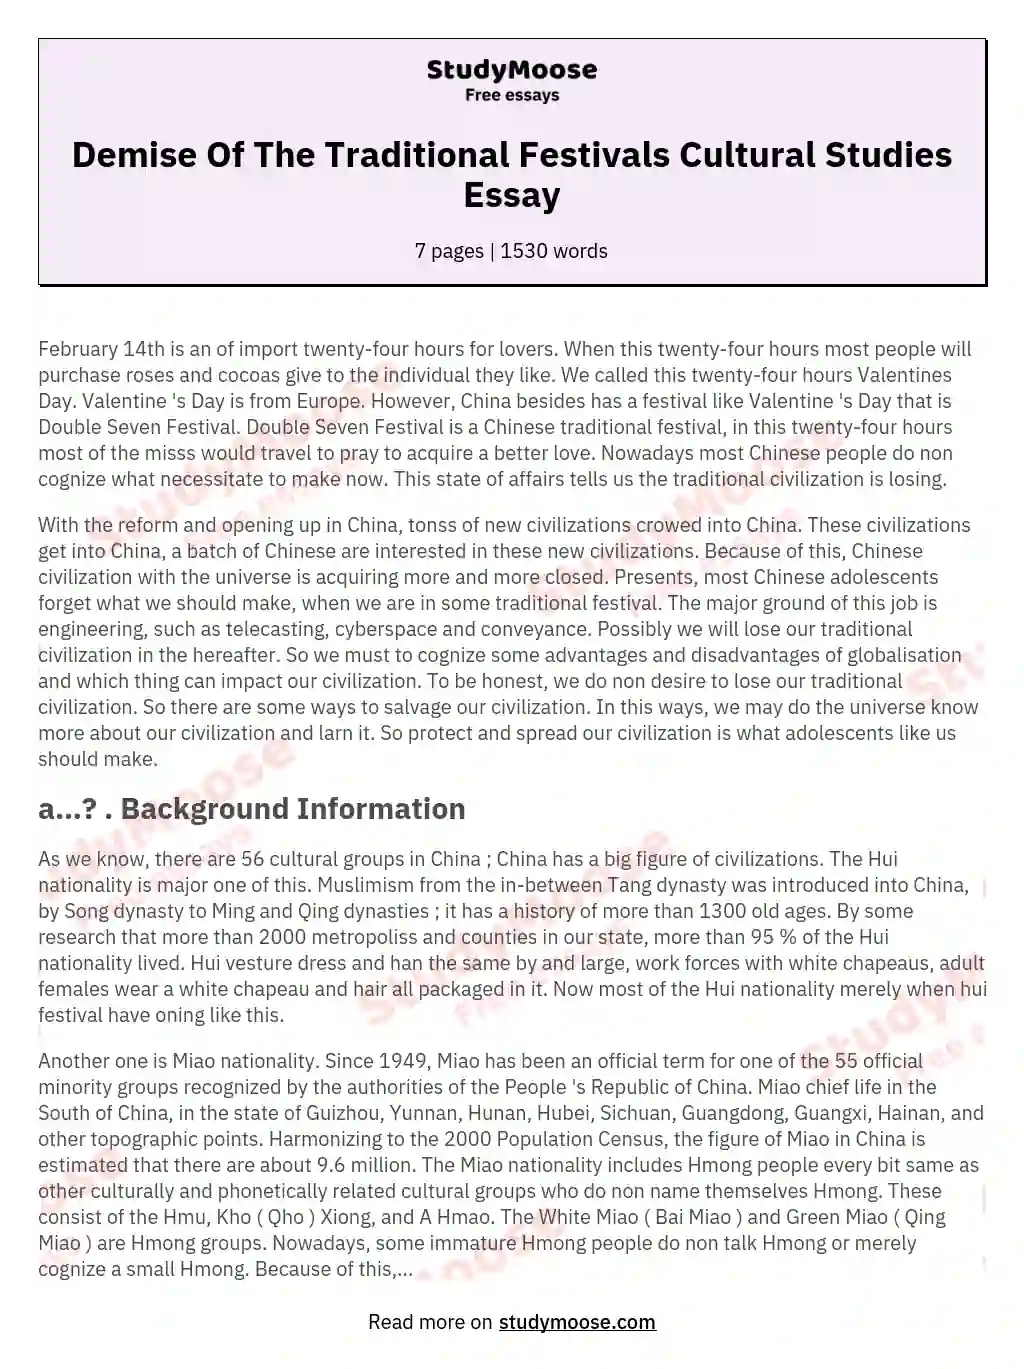 Demise Of The Traditional Festivals Cultural Studies Essay